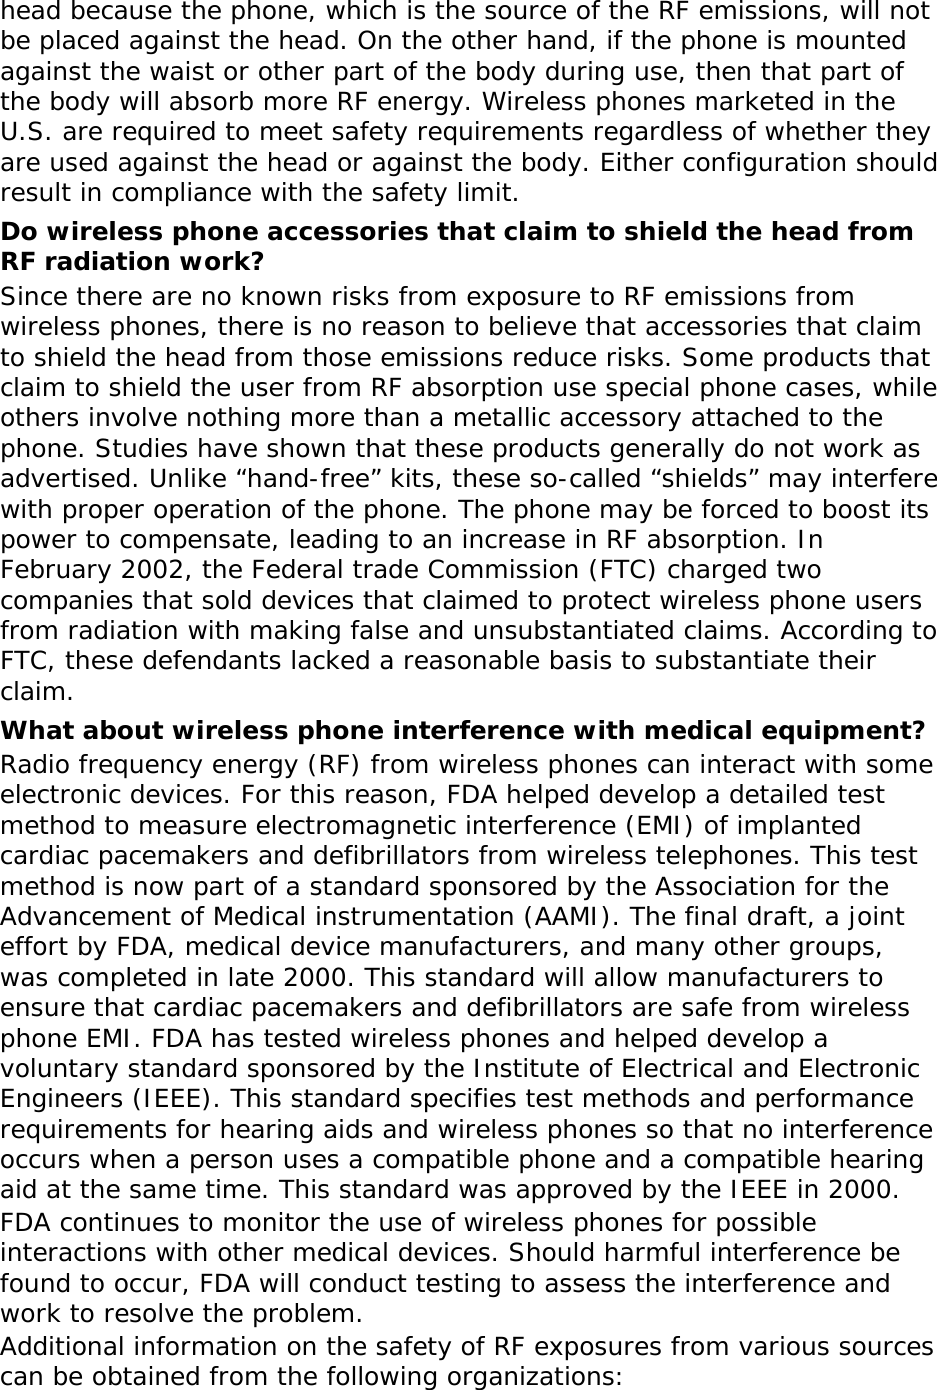 head because the phone, which is the source of the RF emissions, will not be placed against the head. On the other hand, if the phone is mounted against the waist or other part of the body during use, then that part of the body will absorb more RF energy. Wireless phones marketed in the U.S. are required to meet safety requirements regardless of whether they are used against the head or against the body. Either configuration should result in compliance with the safety limit. Do wireless phone accessories that claim to shield the head from RF radiation work? Since there are no known risks from exposure to RF emissions from wireless phones, there is no reason to believe that accessories that claim to shield the head from those emissions reduce risks. Some products that claim to shield the user from RF absorption use special phone cases, while others involve nothing more than a metallic accessory attached to the phone. Studies have shown that these products generally do not work as advertised. Unlike “hand-free” kits, these so-called “shields” may interfere with proper operation of the phone. The phone may be forced to boost its power to compensate, leading to an increase in RF absorption. In February 2002, the Federal trade Commission (FTC) charged two companies that sold devices that claimed to protect wireless phone users from radiation with making false and unsubstantiated claims. According to FTC, these defendants lacked a reasonable basis to substantiate their claim. What about wireless phone interference with medical equipment? Radio frequency energy (RF) from wireless phones can interact with some electronic devices. For this reason, FDA helped develop a detailed test method to measure electromagnetic interference (EMI) of implanted cardiac pacemakers and defibrillators from wireless telephones. This test method is now part of a standard sponsored by the Association for the Advancement of Medical instrumentation (AAMI). The final draft, a joint effort by FDA, medical device manufacturers, and many other groups, was completed in late 2000. This standard will allow manufacturers to ensure that cardiac pacemakers and defibrillators are safe from wireless phone EMI. FDA has tested wireless phones and helped develop a voluntary standard sponsored by the Institute of Electrical and Electronic Engineers (IEEE). This standard specifies test methods and performance requirements for hearing aids and wireless phones so that no interference occurs when a person uses a compatible phone and a compatible hearing aid at the same time. This standard was approved by the IEEE in 2000. FDA continues to monitor the use of wireless phones for possible interactions with other medical devices. Should harmful interference be found to occur, FDA will conduct testing to assess the interference and work to resolve the problem. Additional information on the safety of RF exposures from various sources can be obtained from the following organizations: 